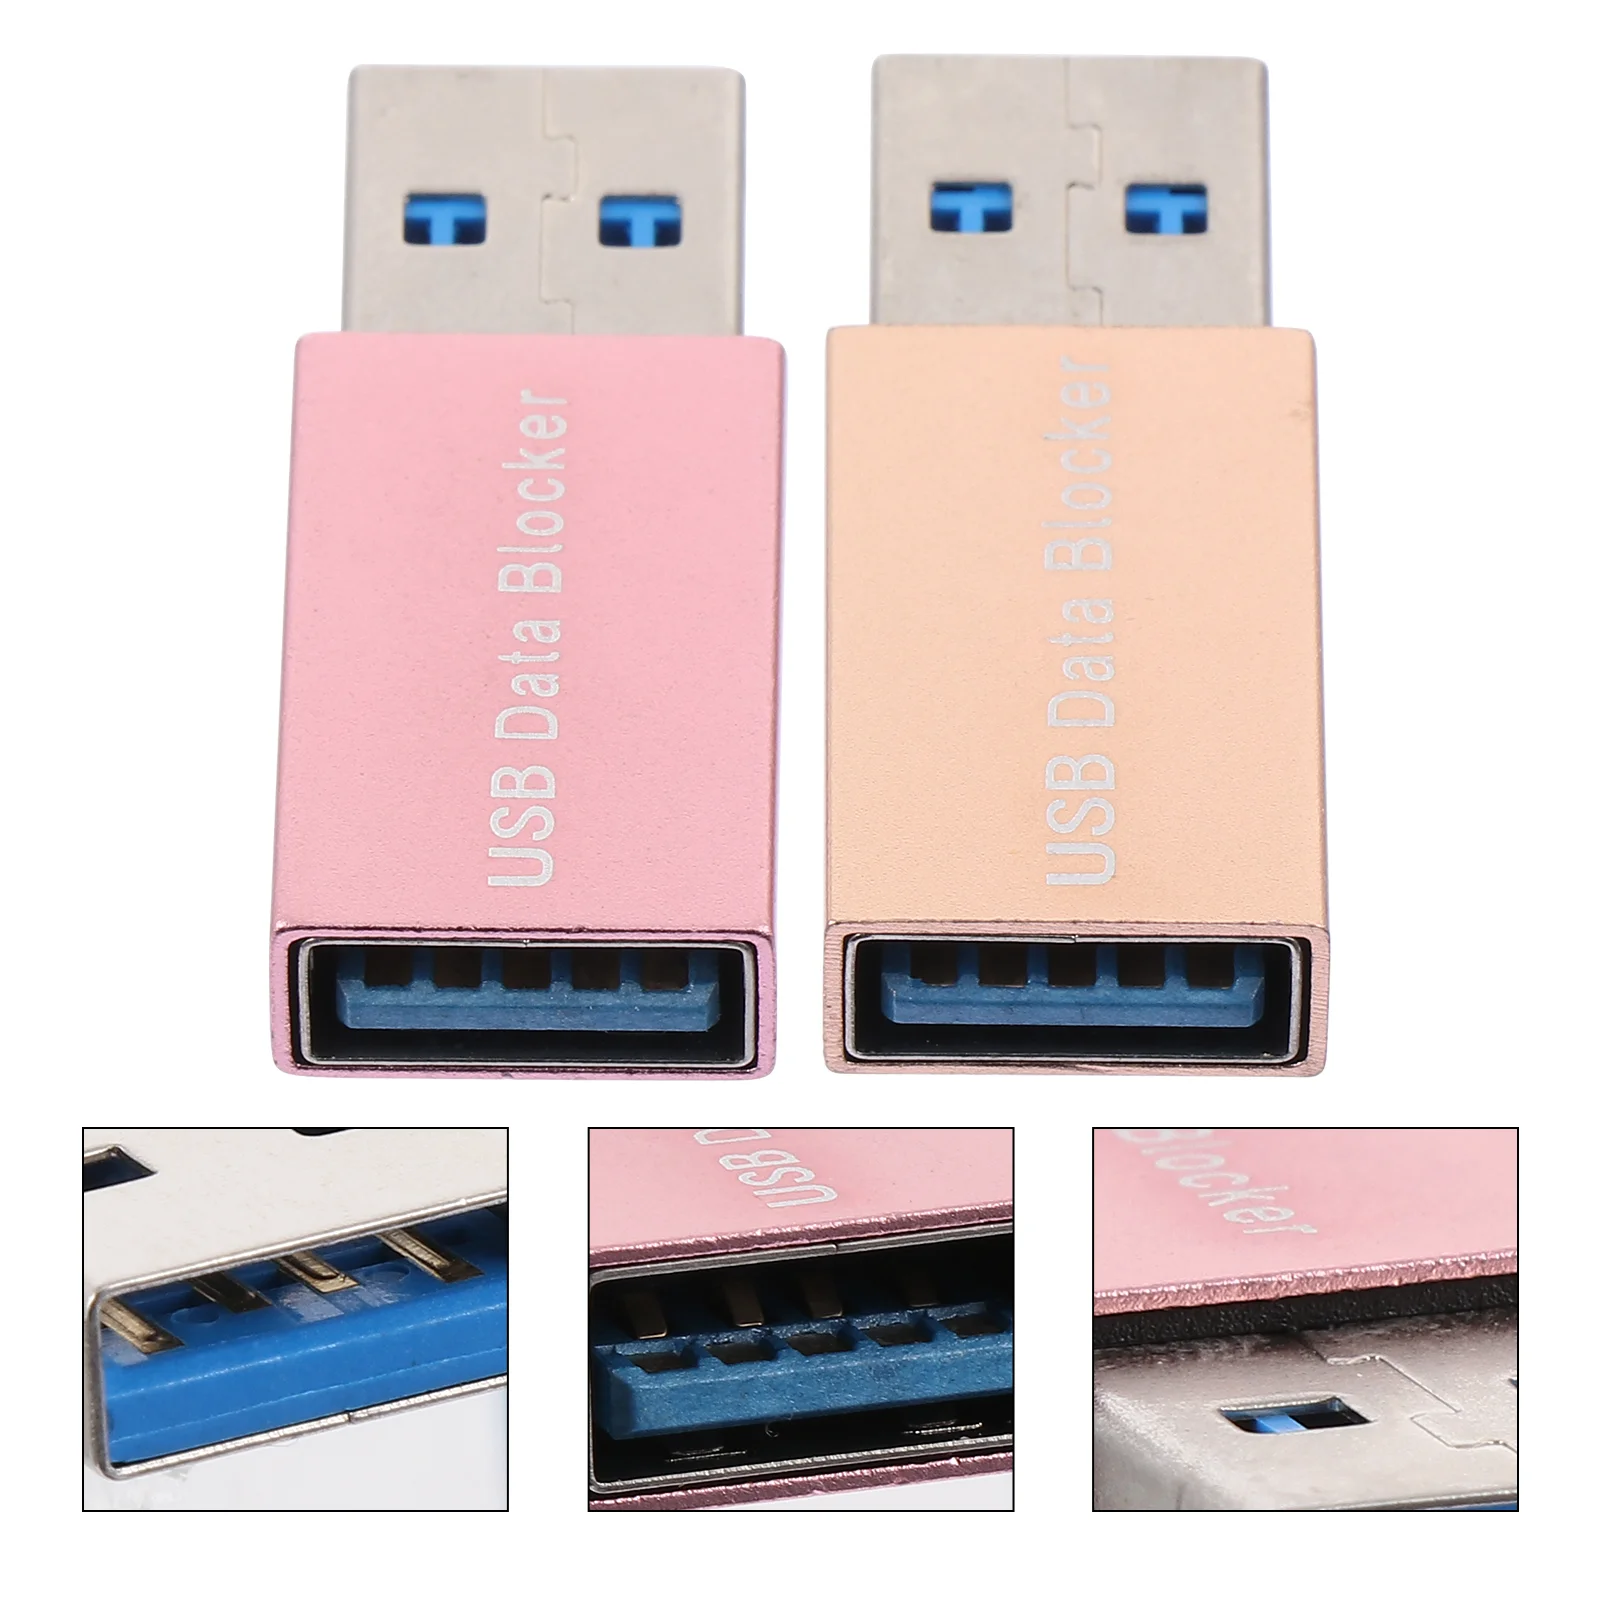 

2 PCS Data Blocker Adapter Blocking Sync USB Charge-Only Adaptor Converter Connector